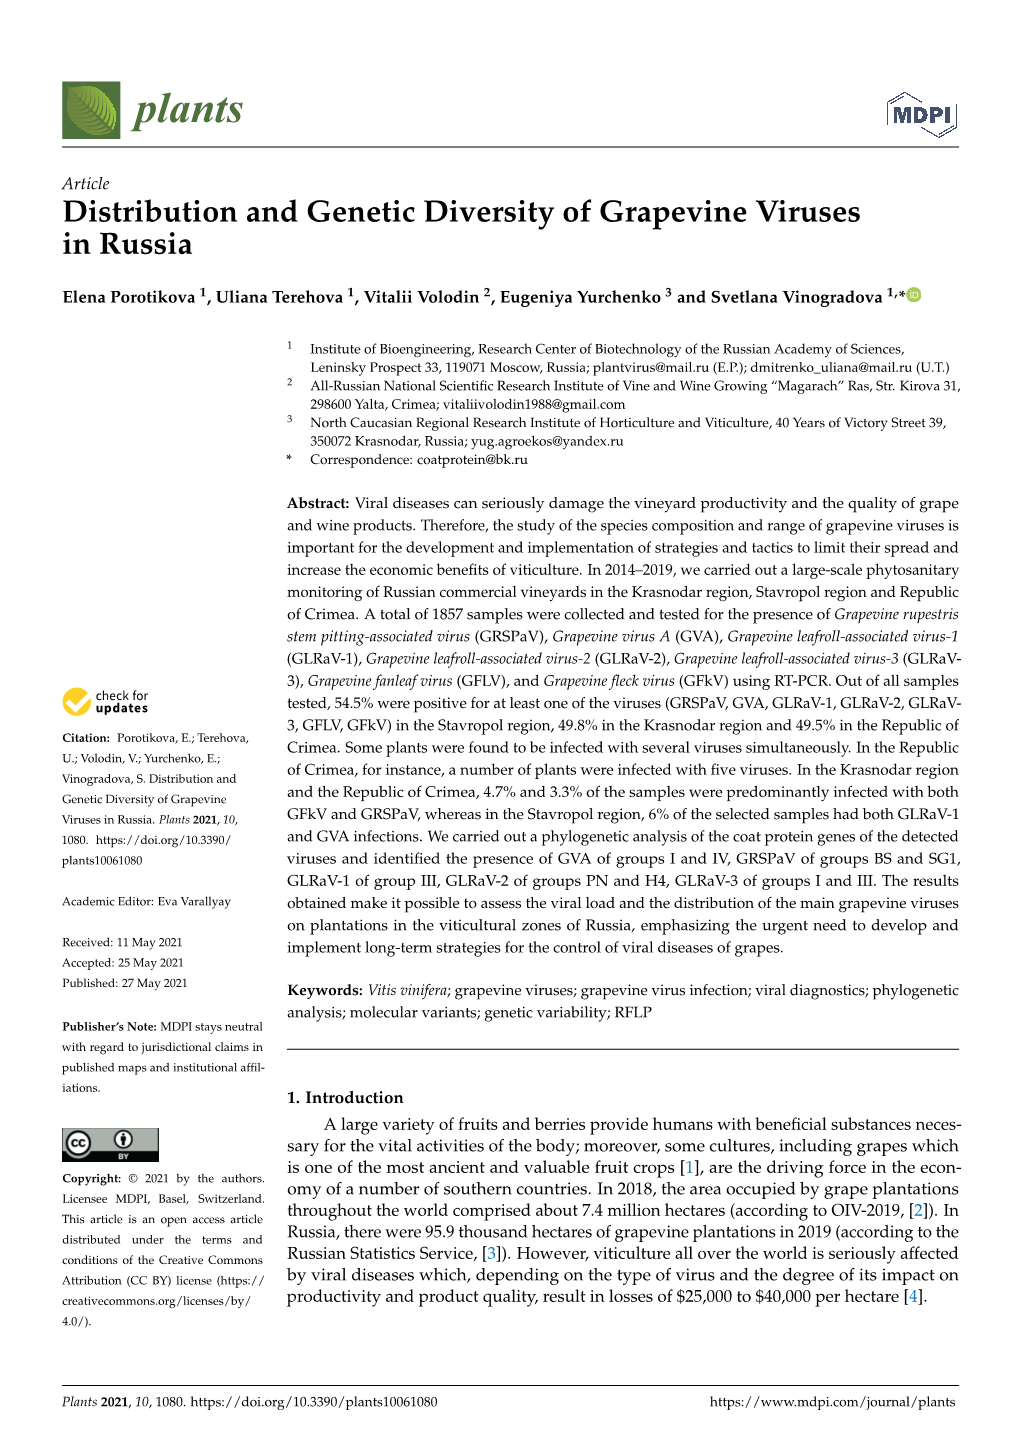 Distribution and Genetic Diversity of Grapevine Viruses in Russia